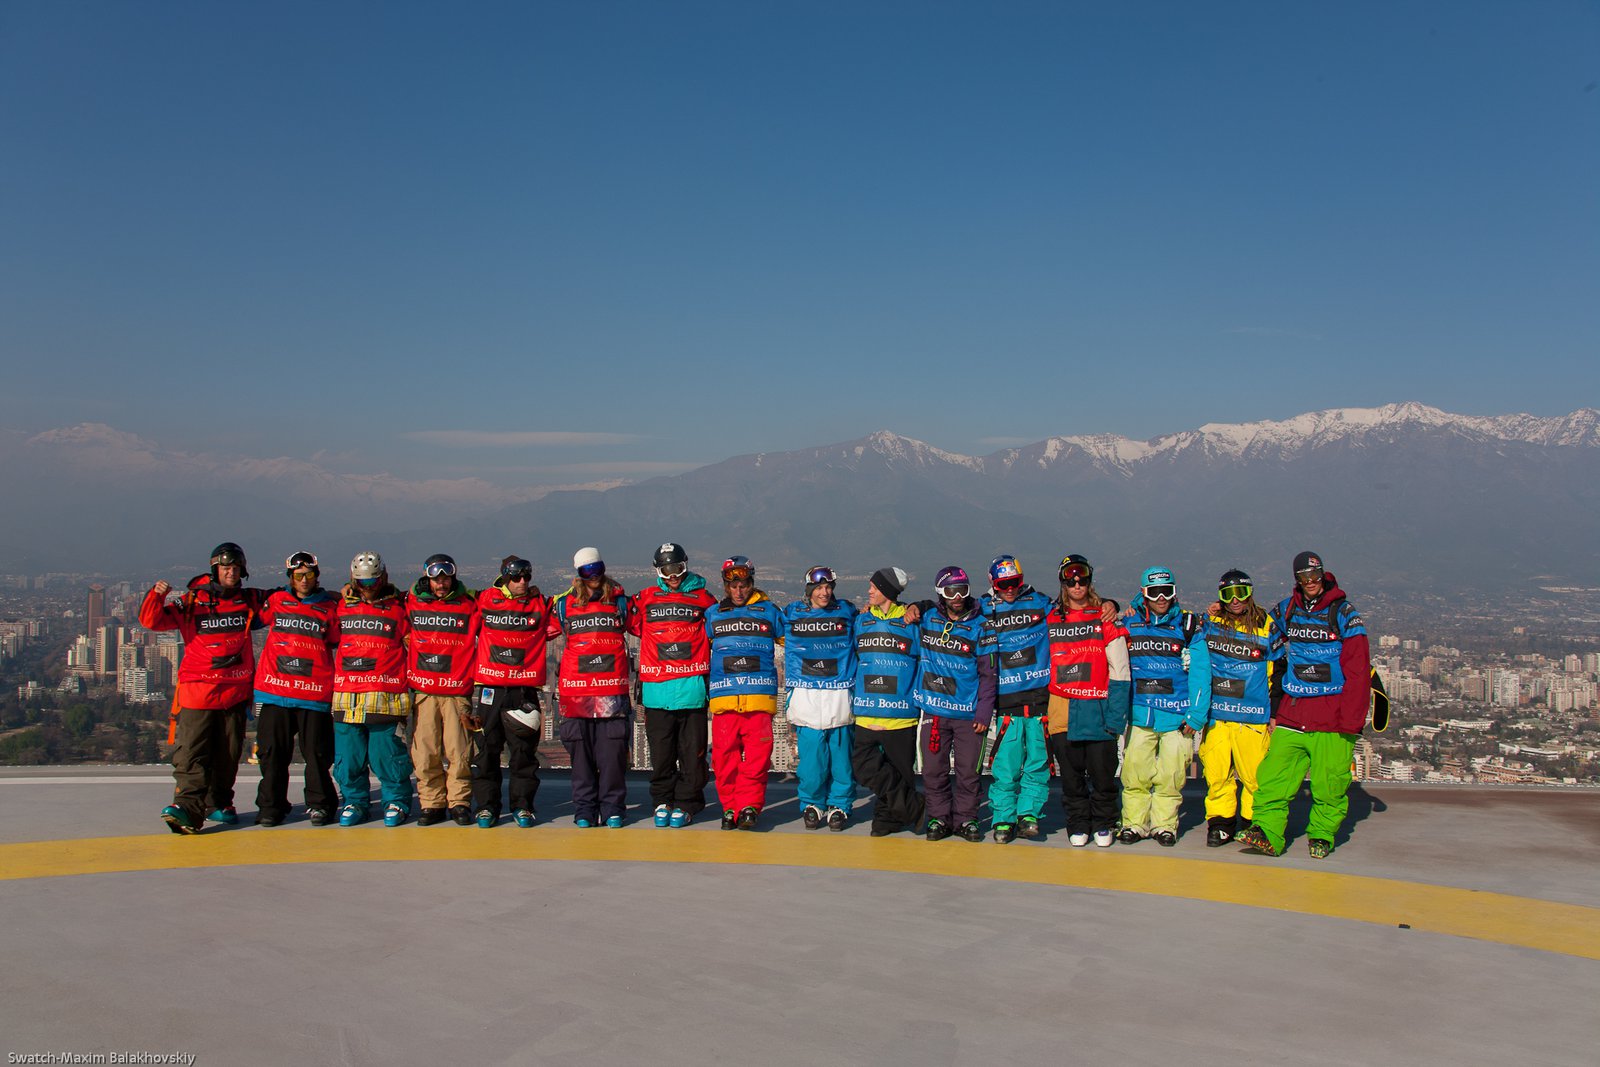 Team Americas & Team Europe at the Swatch Skiers Cup